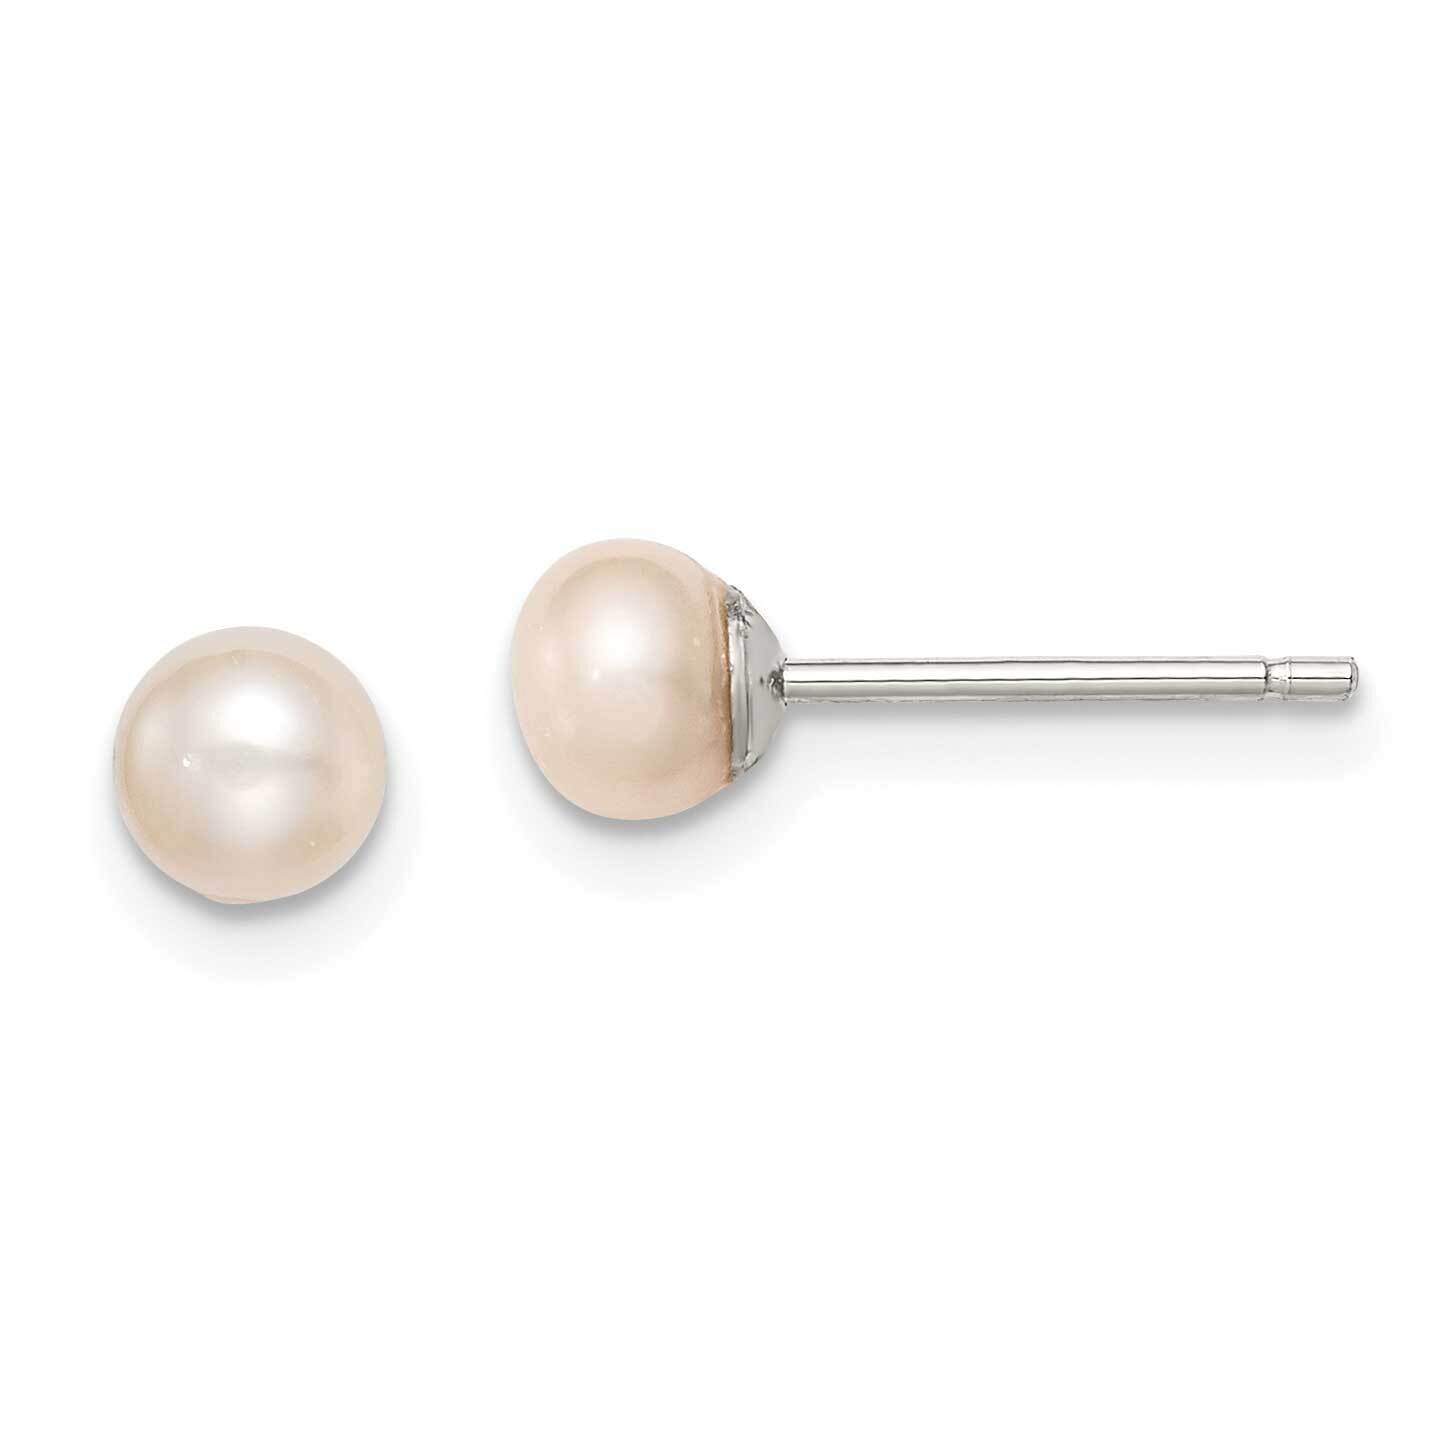 4-5mm Pink Fw Cultured Button Pearl Stud Earrings Sterling Silver Rhodium-plated QE12683